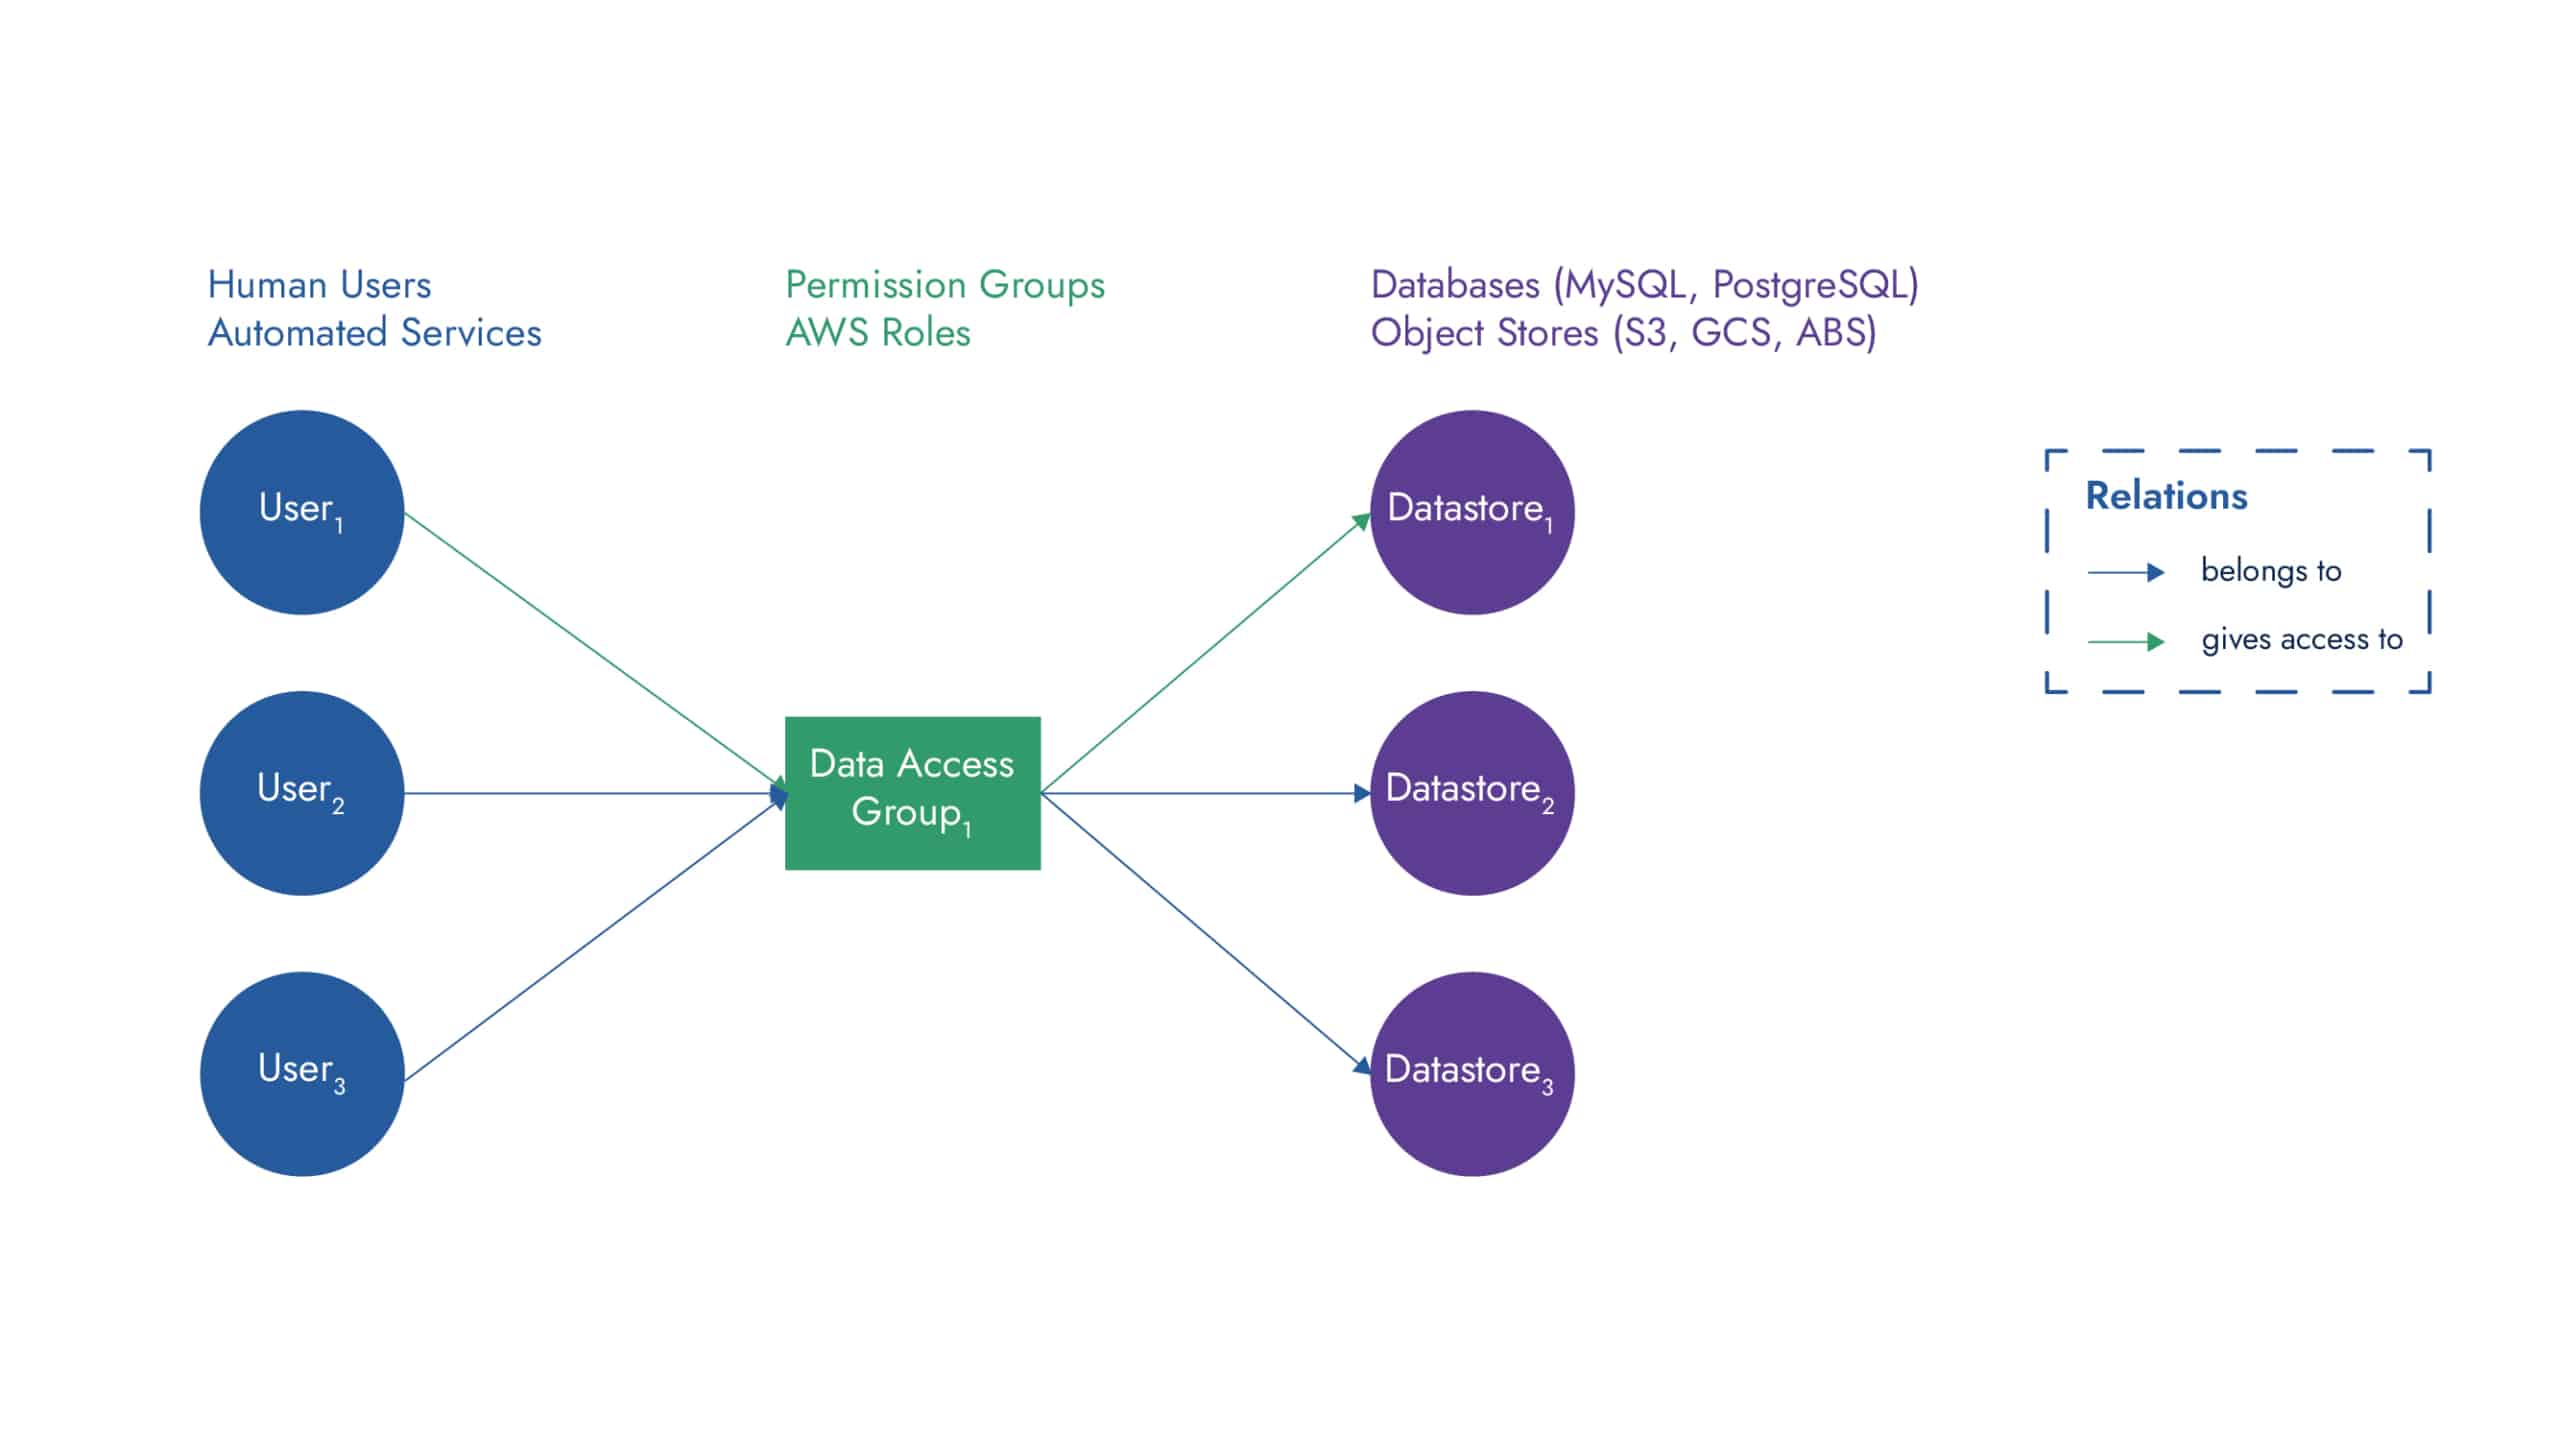 Data Access Group graph for users and datastore